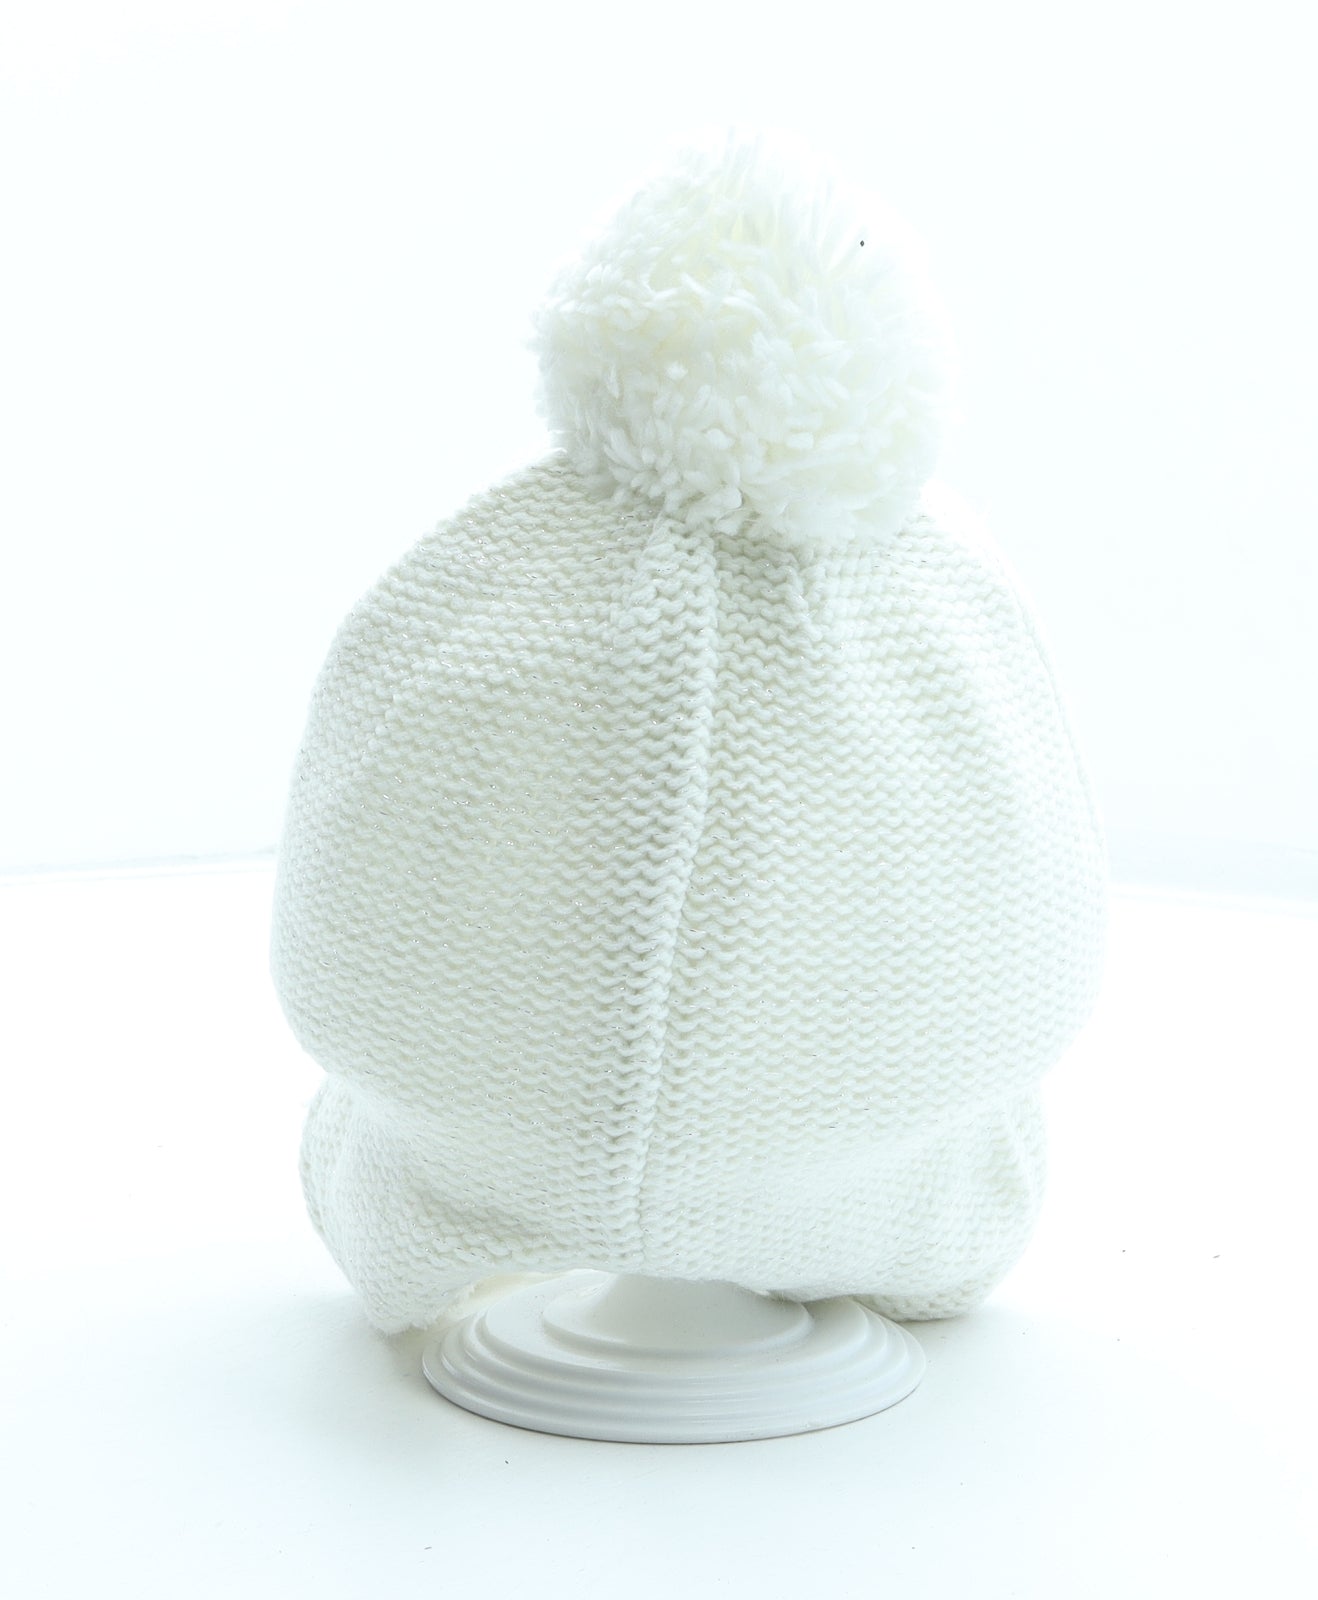 Marks and Spencer Girls White Geometric Acrylic Bobble Hat Size S - Peppa Pig Size 3-6 Years